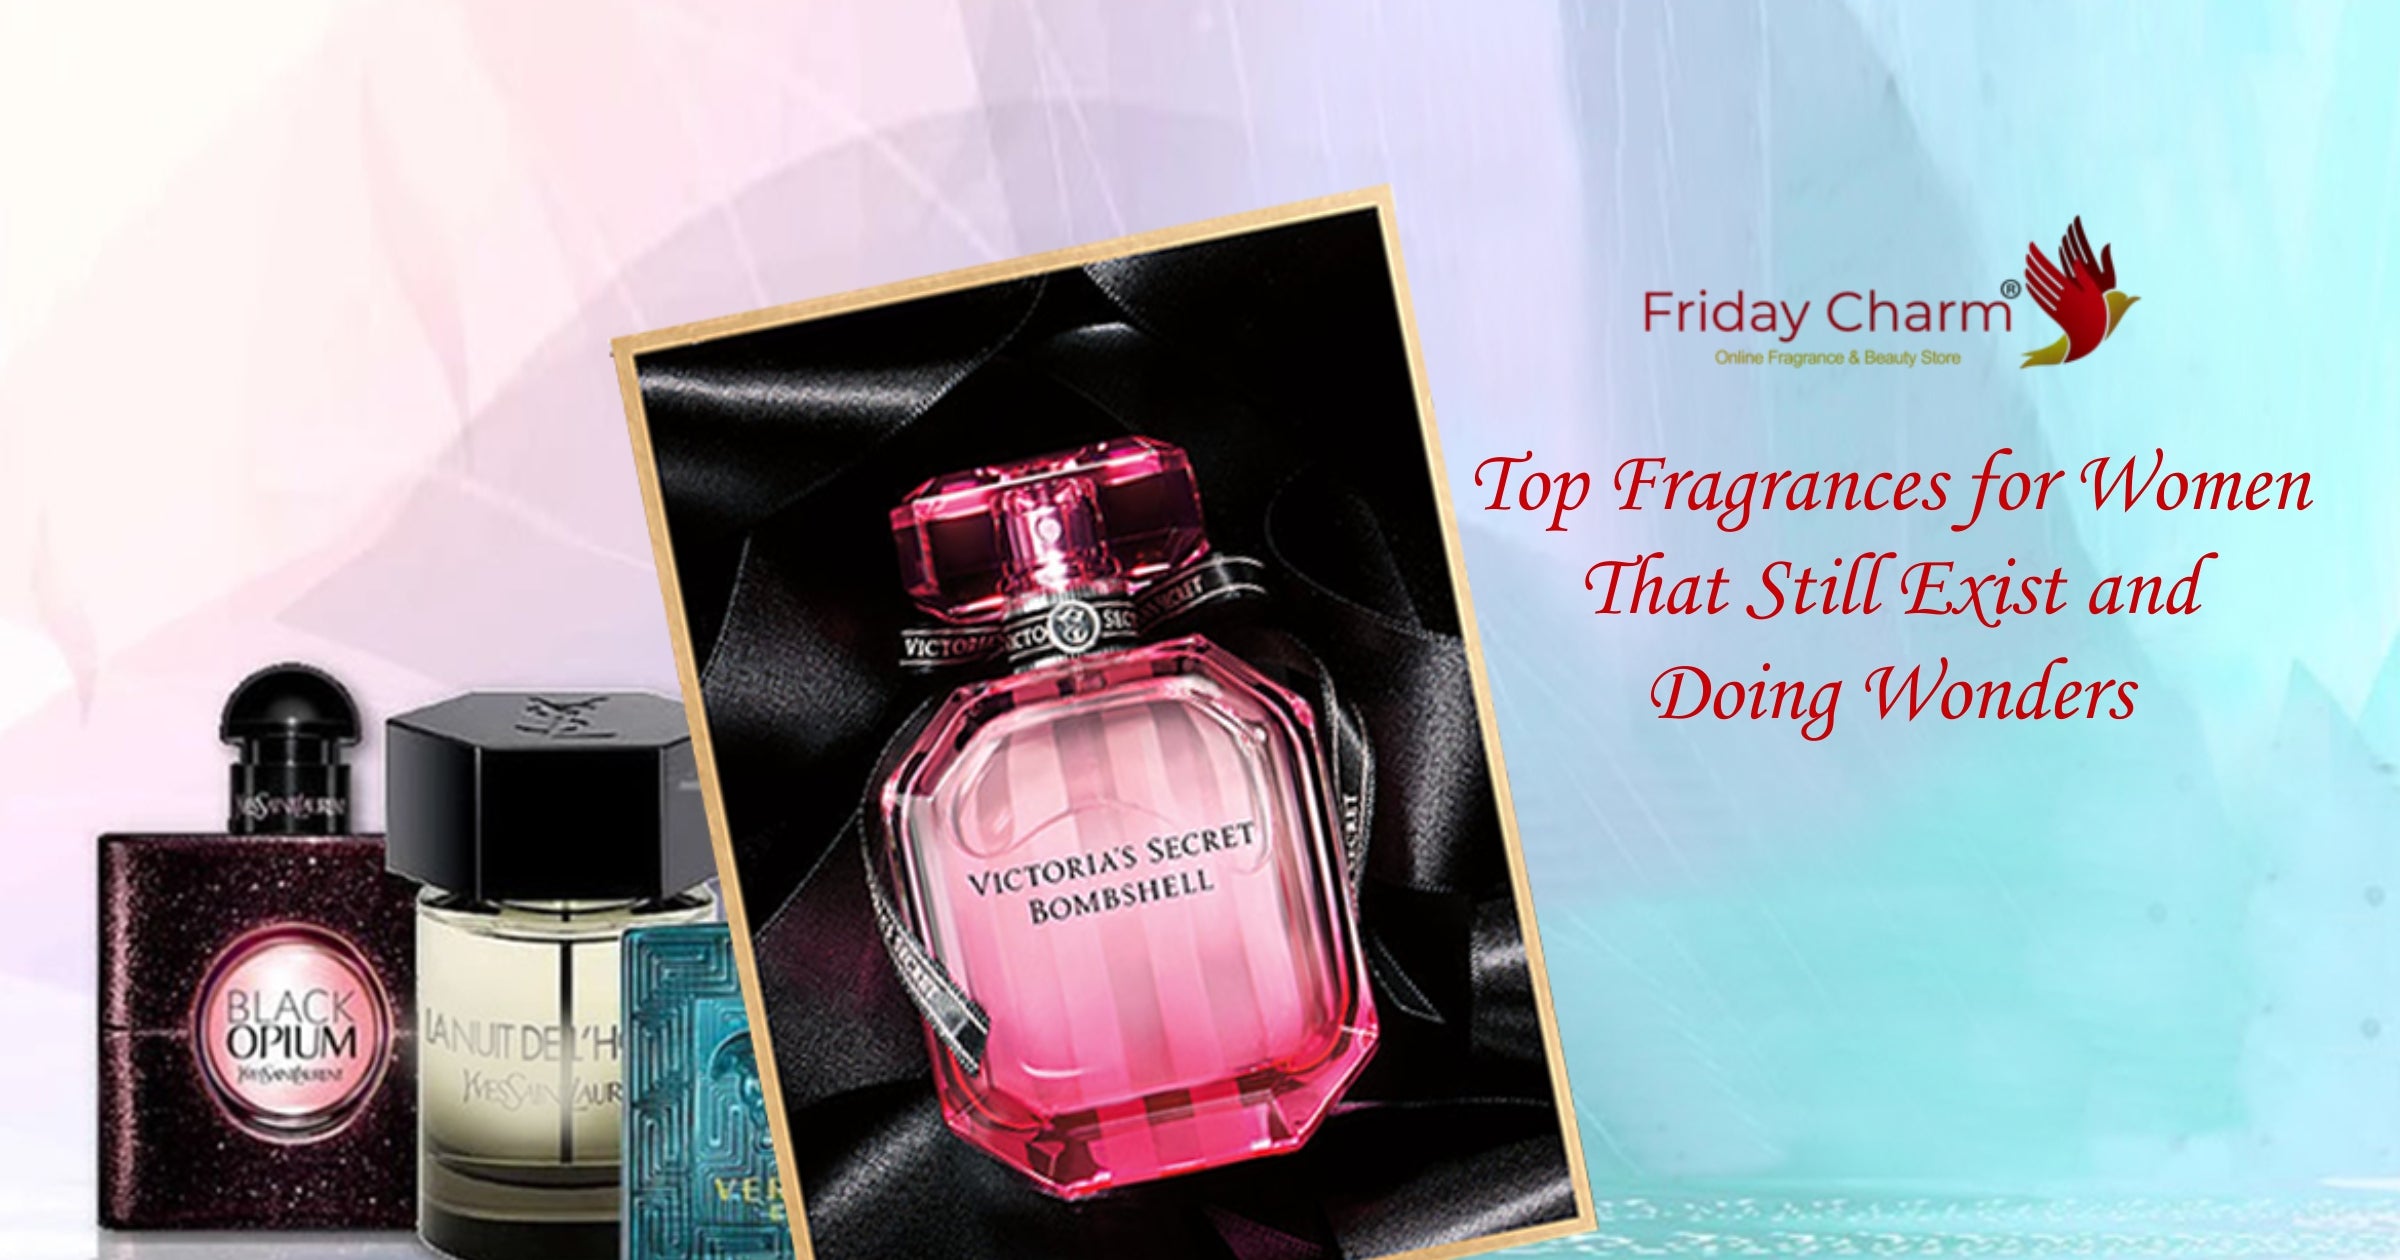 Top fragrances for women that still exists and are doing wonders